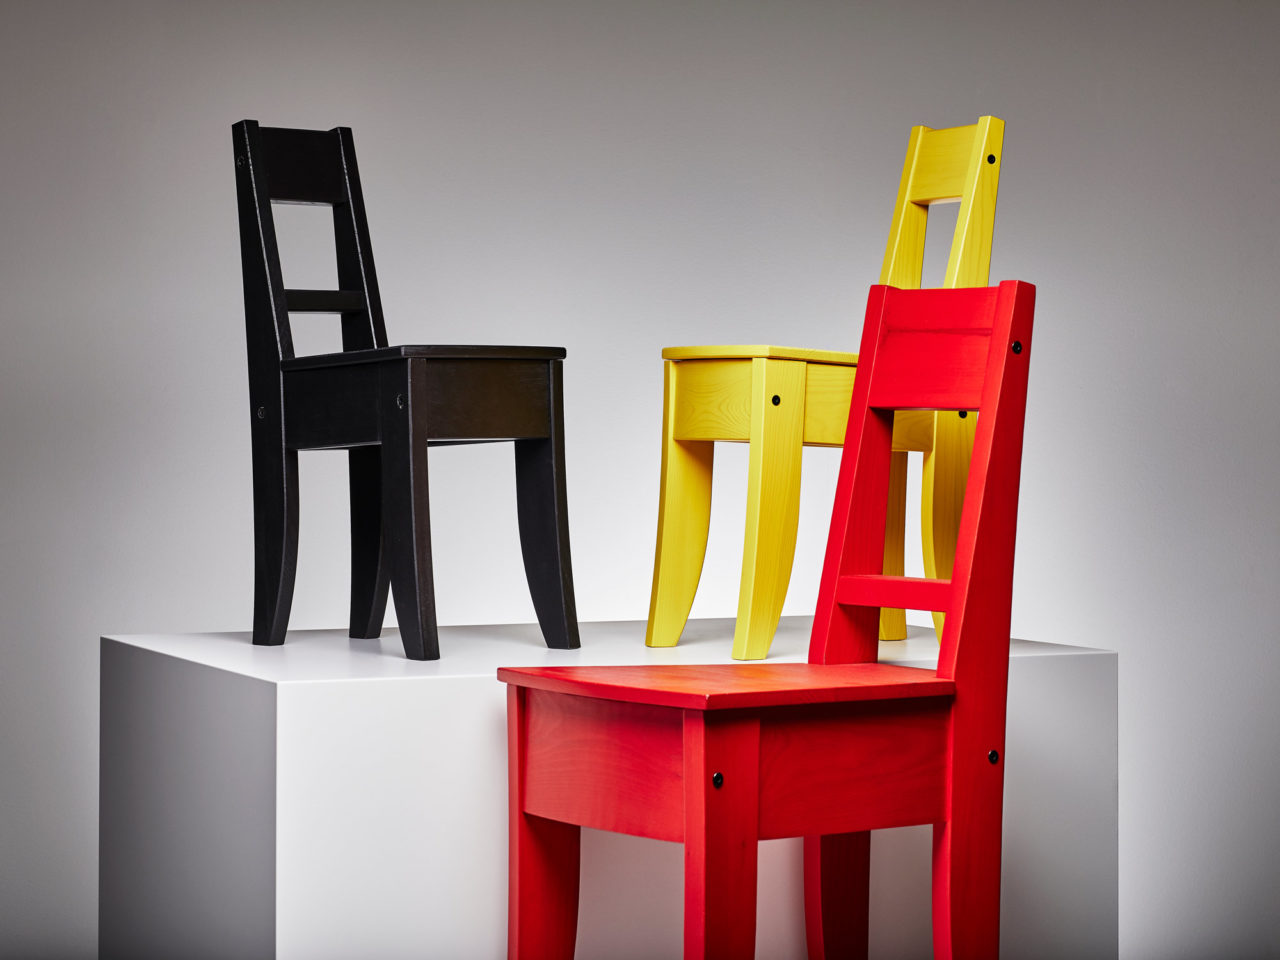 Three simple wooden chairs, one black, one yellow, one red, arranged on and next to a white cube.